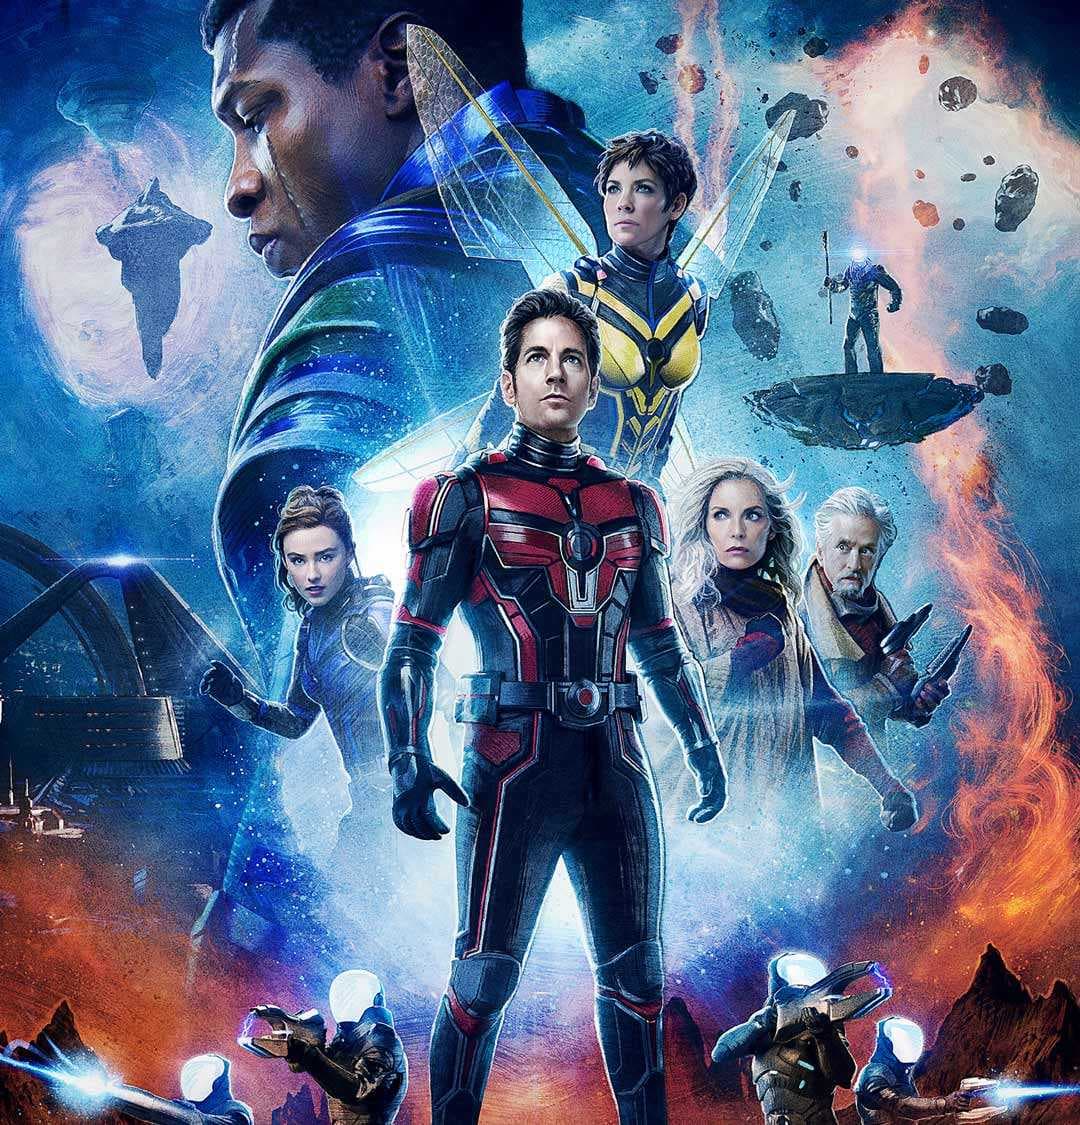 movie poster from latest Ant-Man film